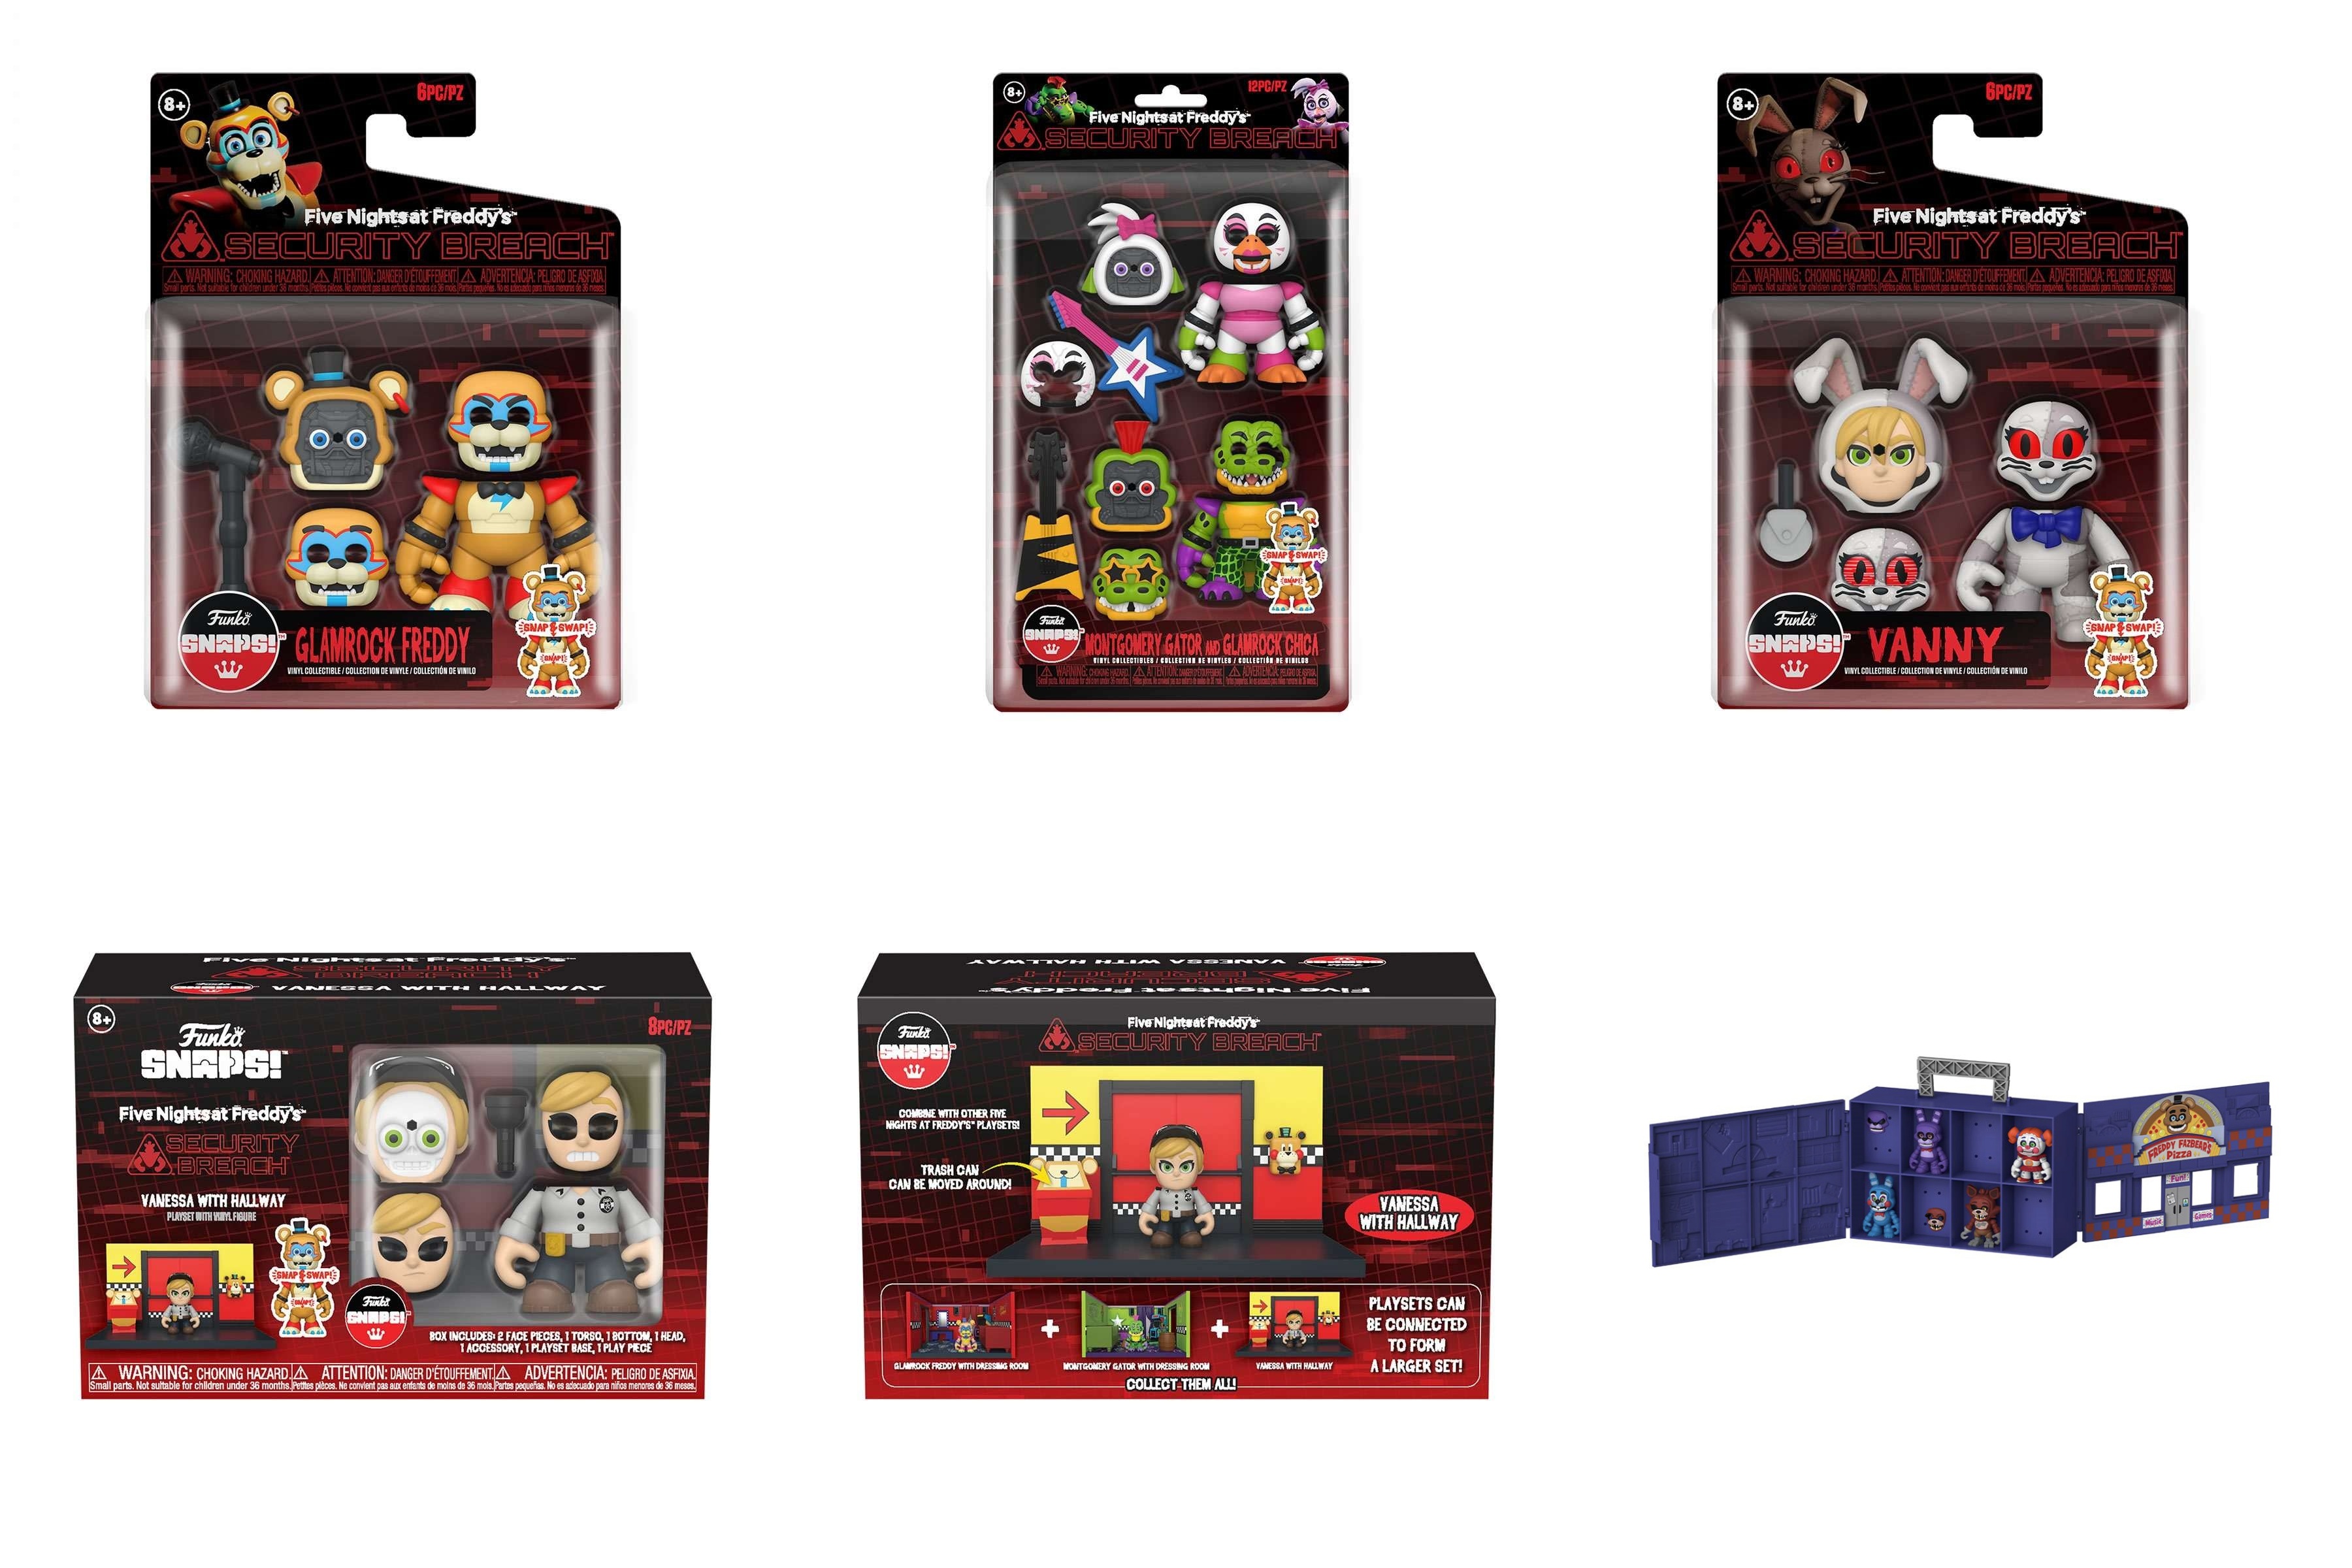 Funko Snaps!: Five Nights at Freddy's - Glamrock Freddy with Dressing Room